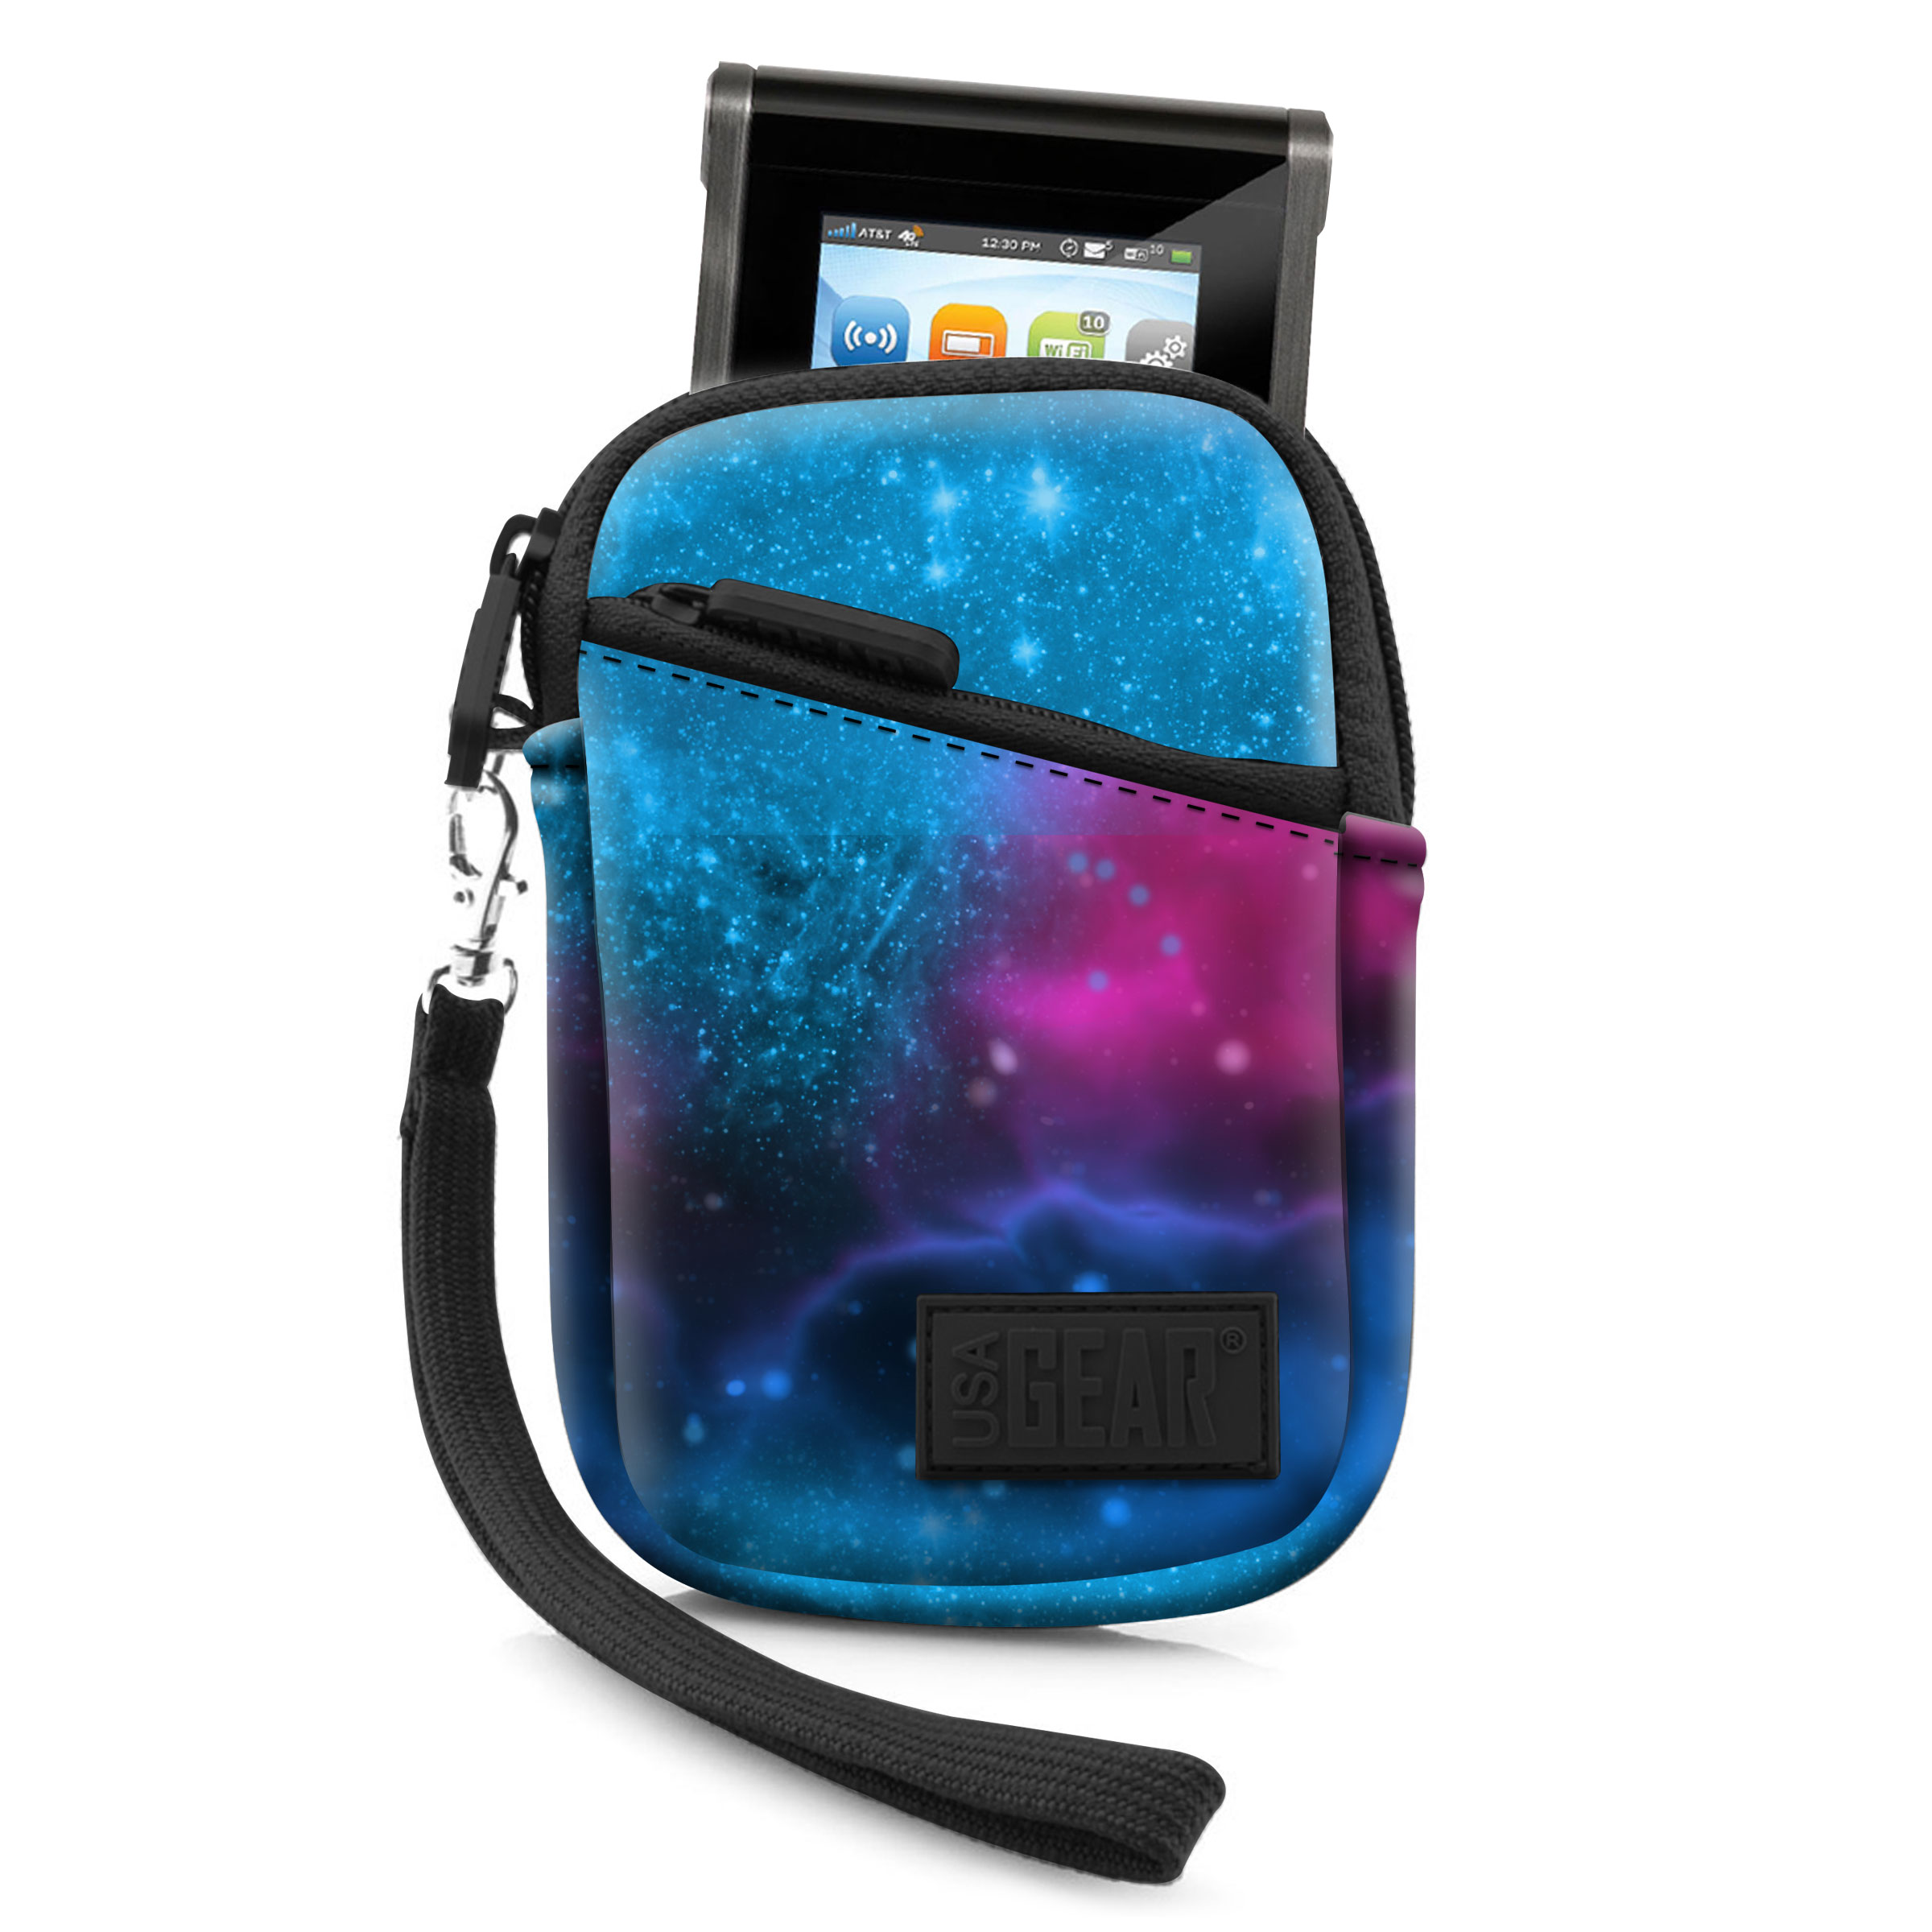 Portable Wi-Fi Hotspot Case with Belt Loop , Wrist Strap & Accessory ...